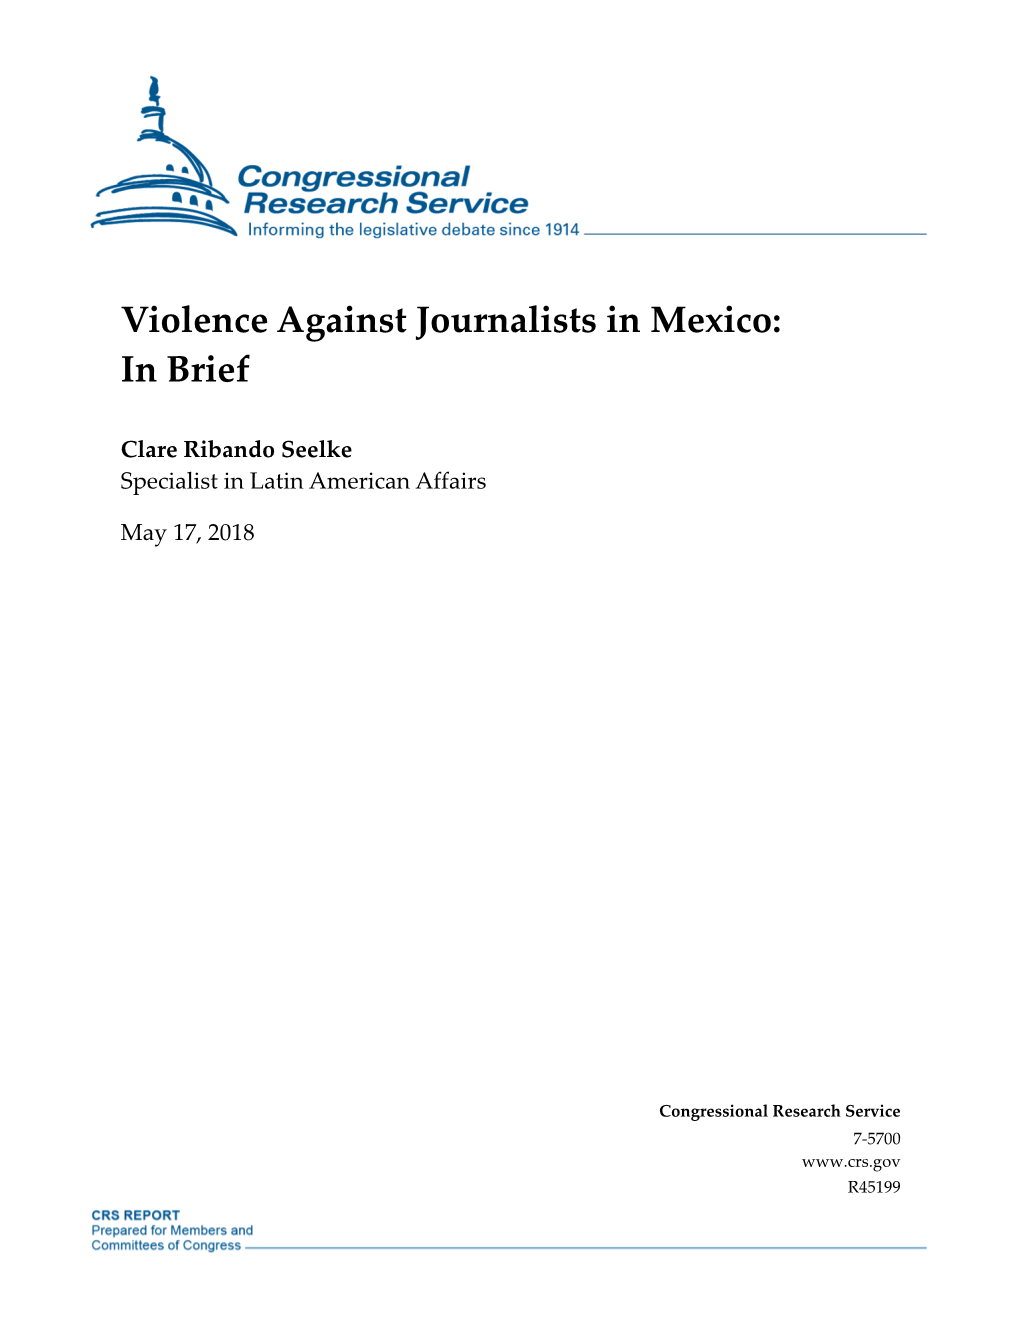 Violence Against Journalists in Mexico: in Brief